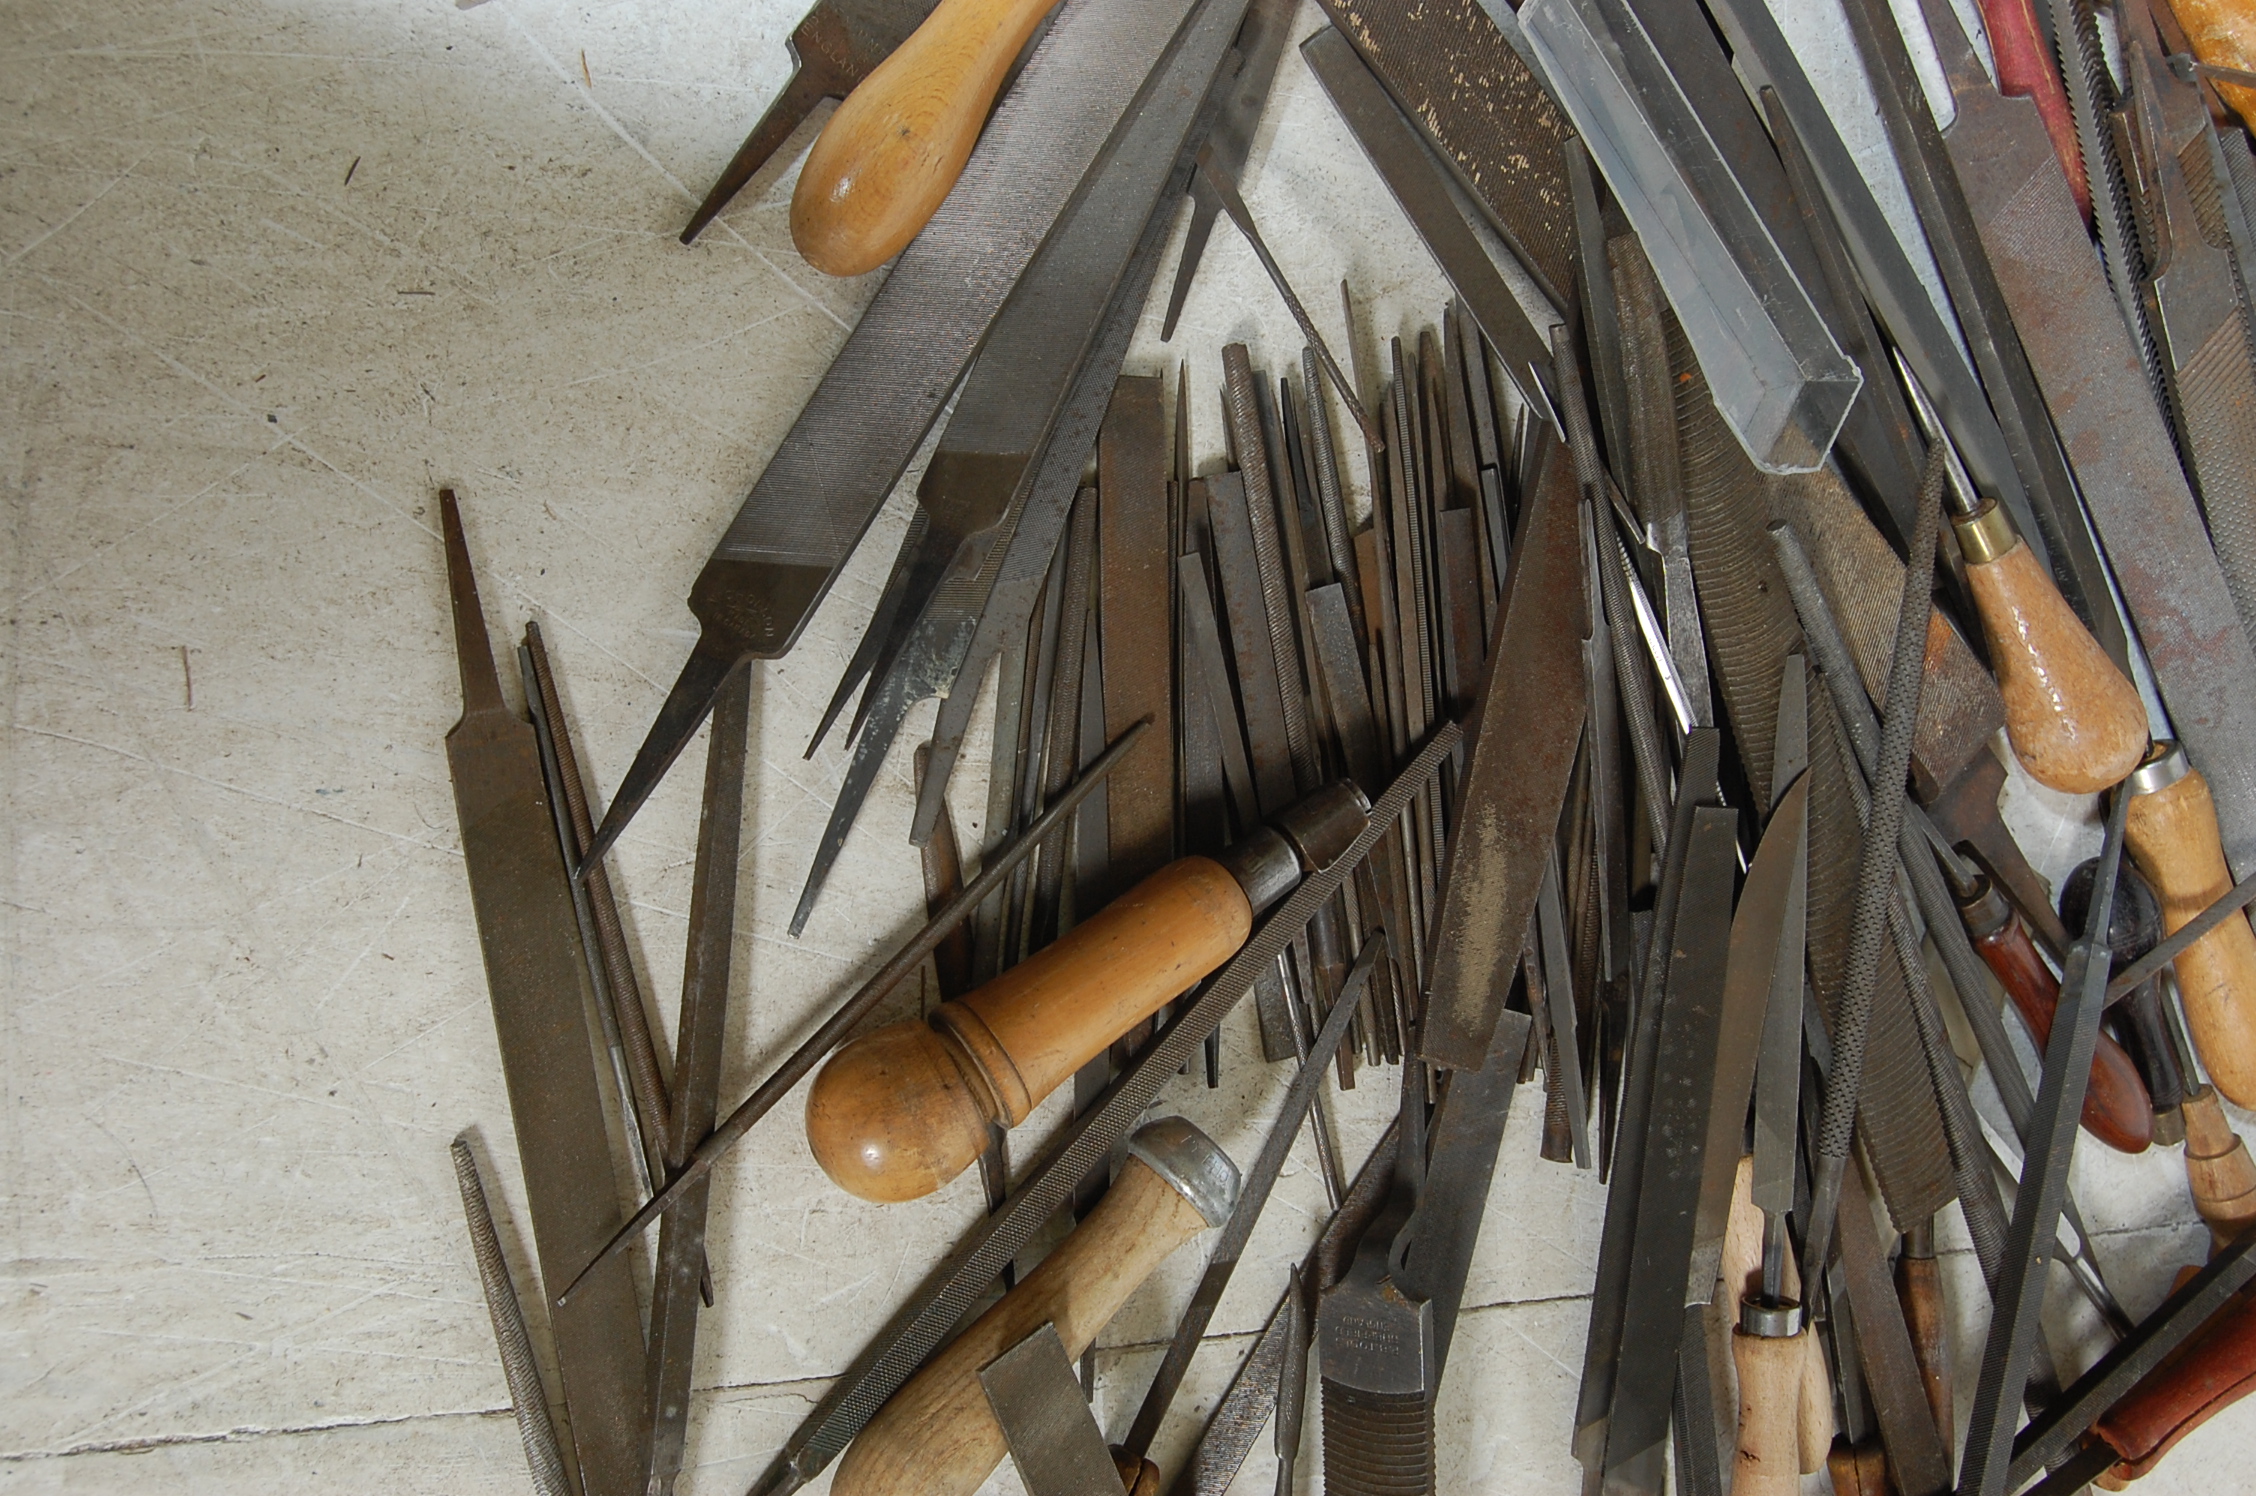 LARGE QUANTITY OF VINTAGE WOODWORKING TOOLS - Image 14 of 23